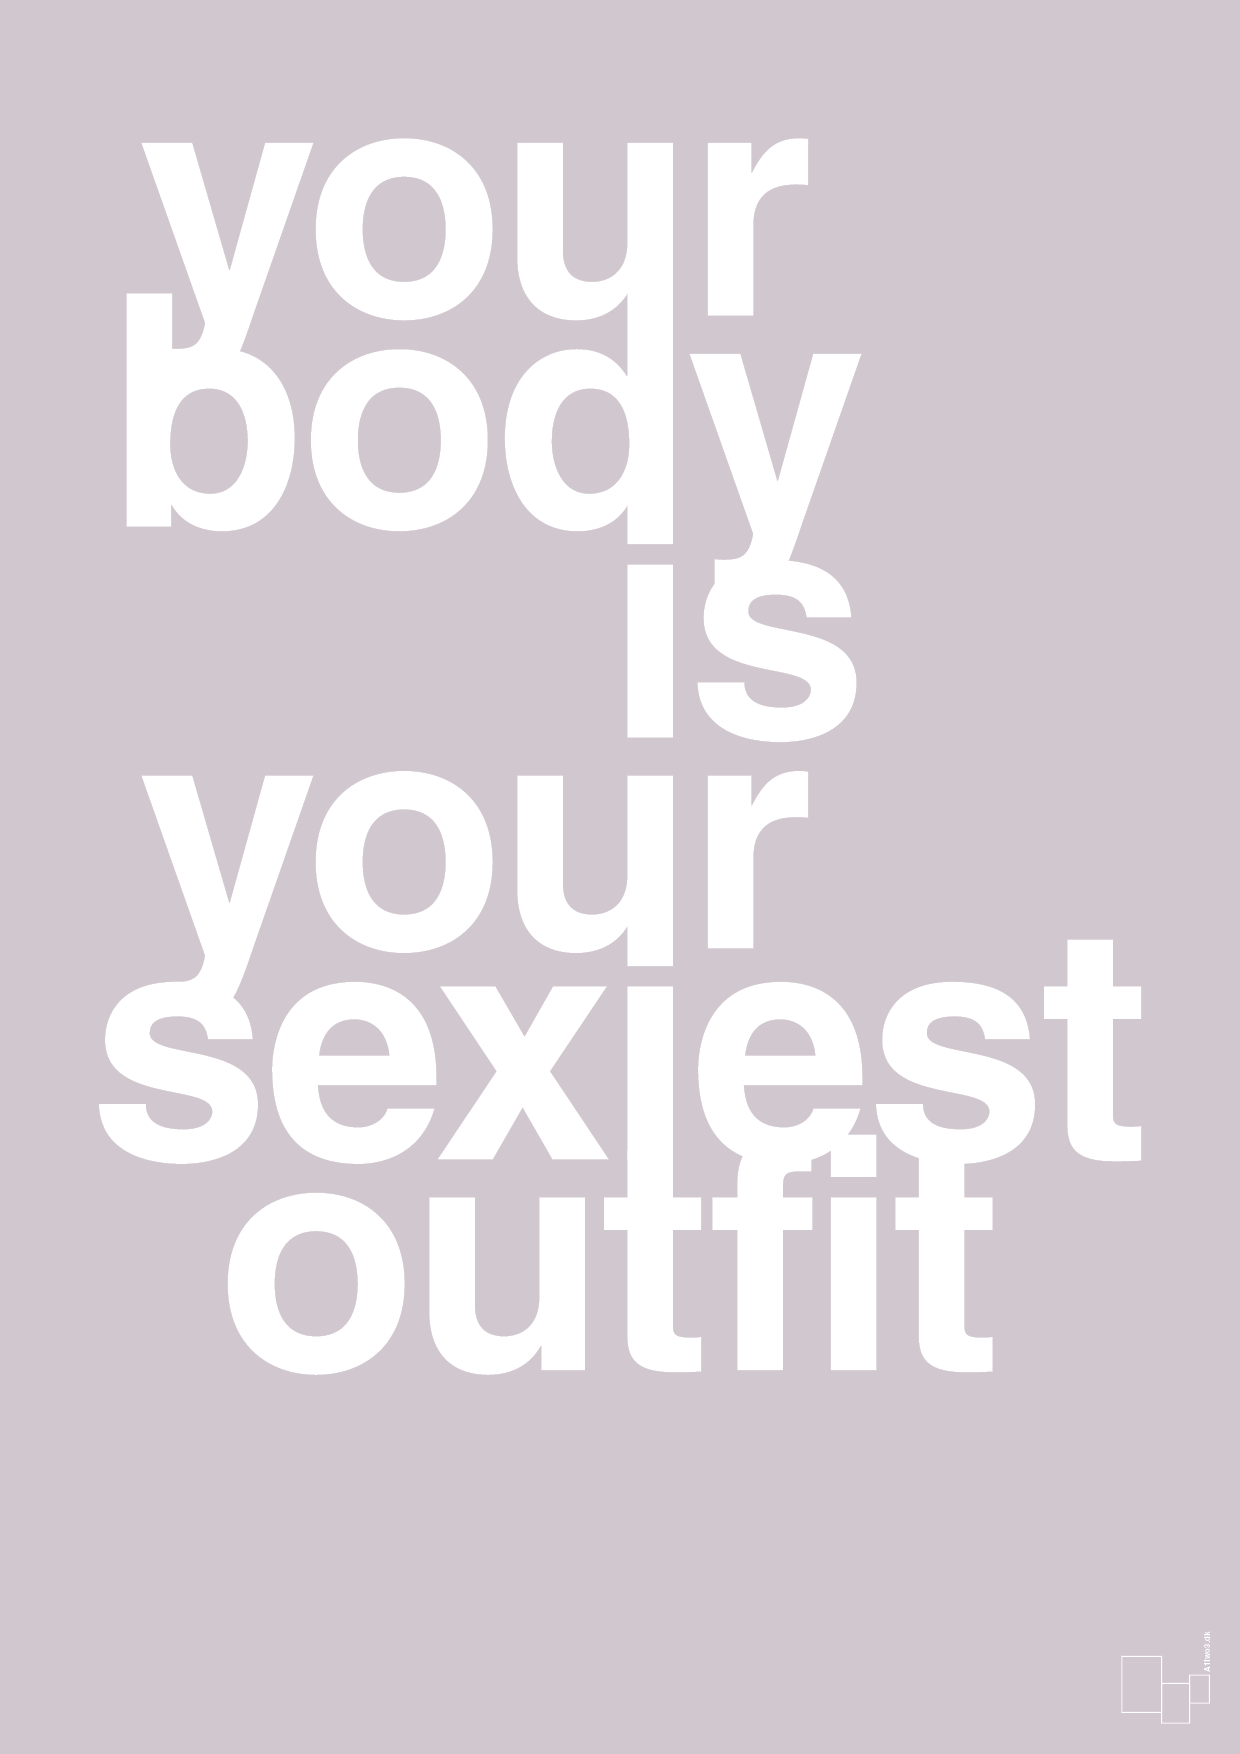 your body is your sexiest outfit - Plakat med Sport & Fritid i Dusty Lilac